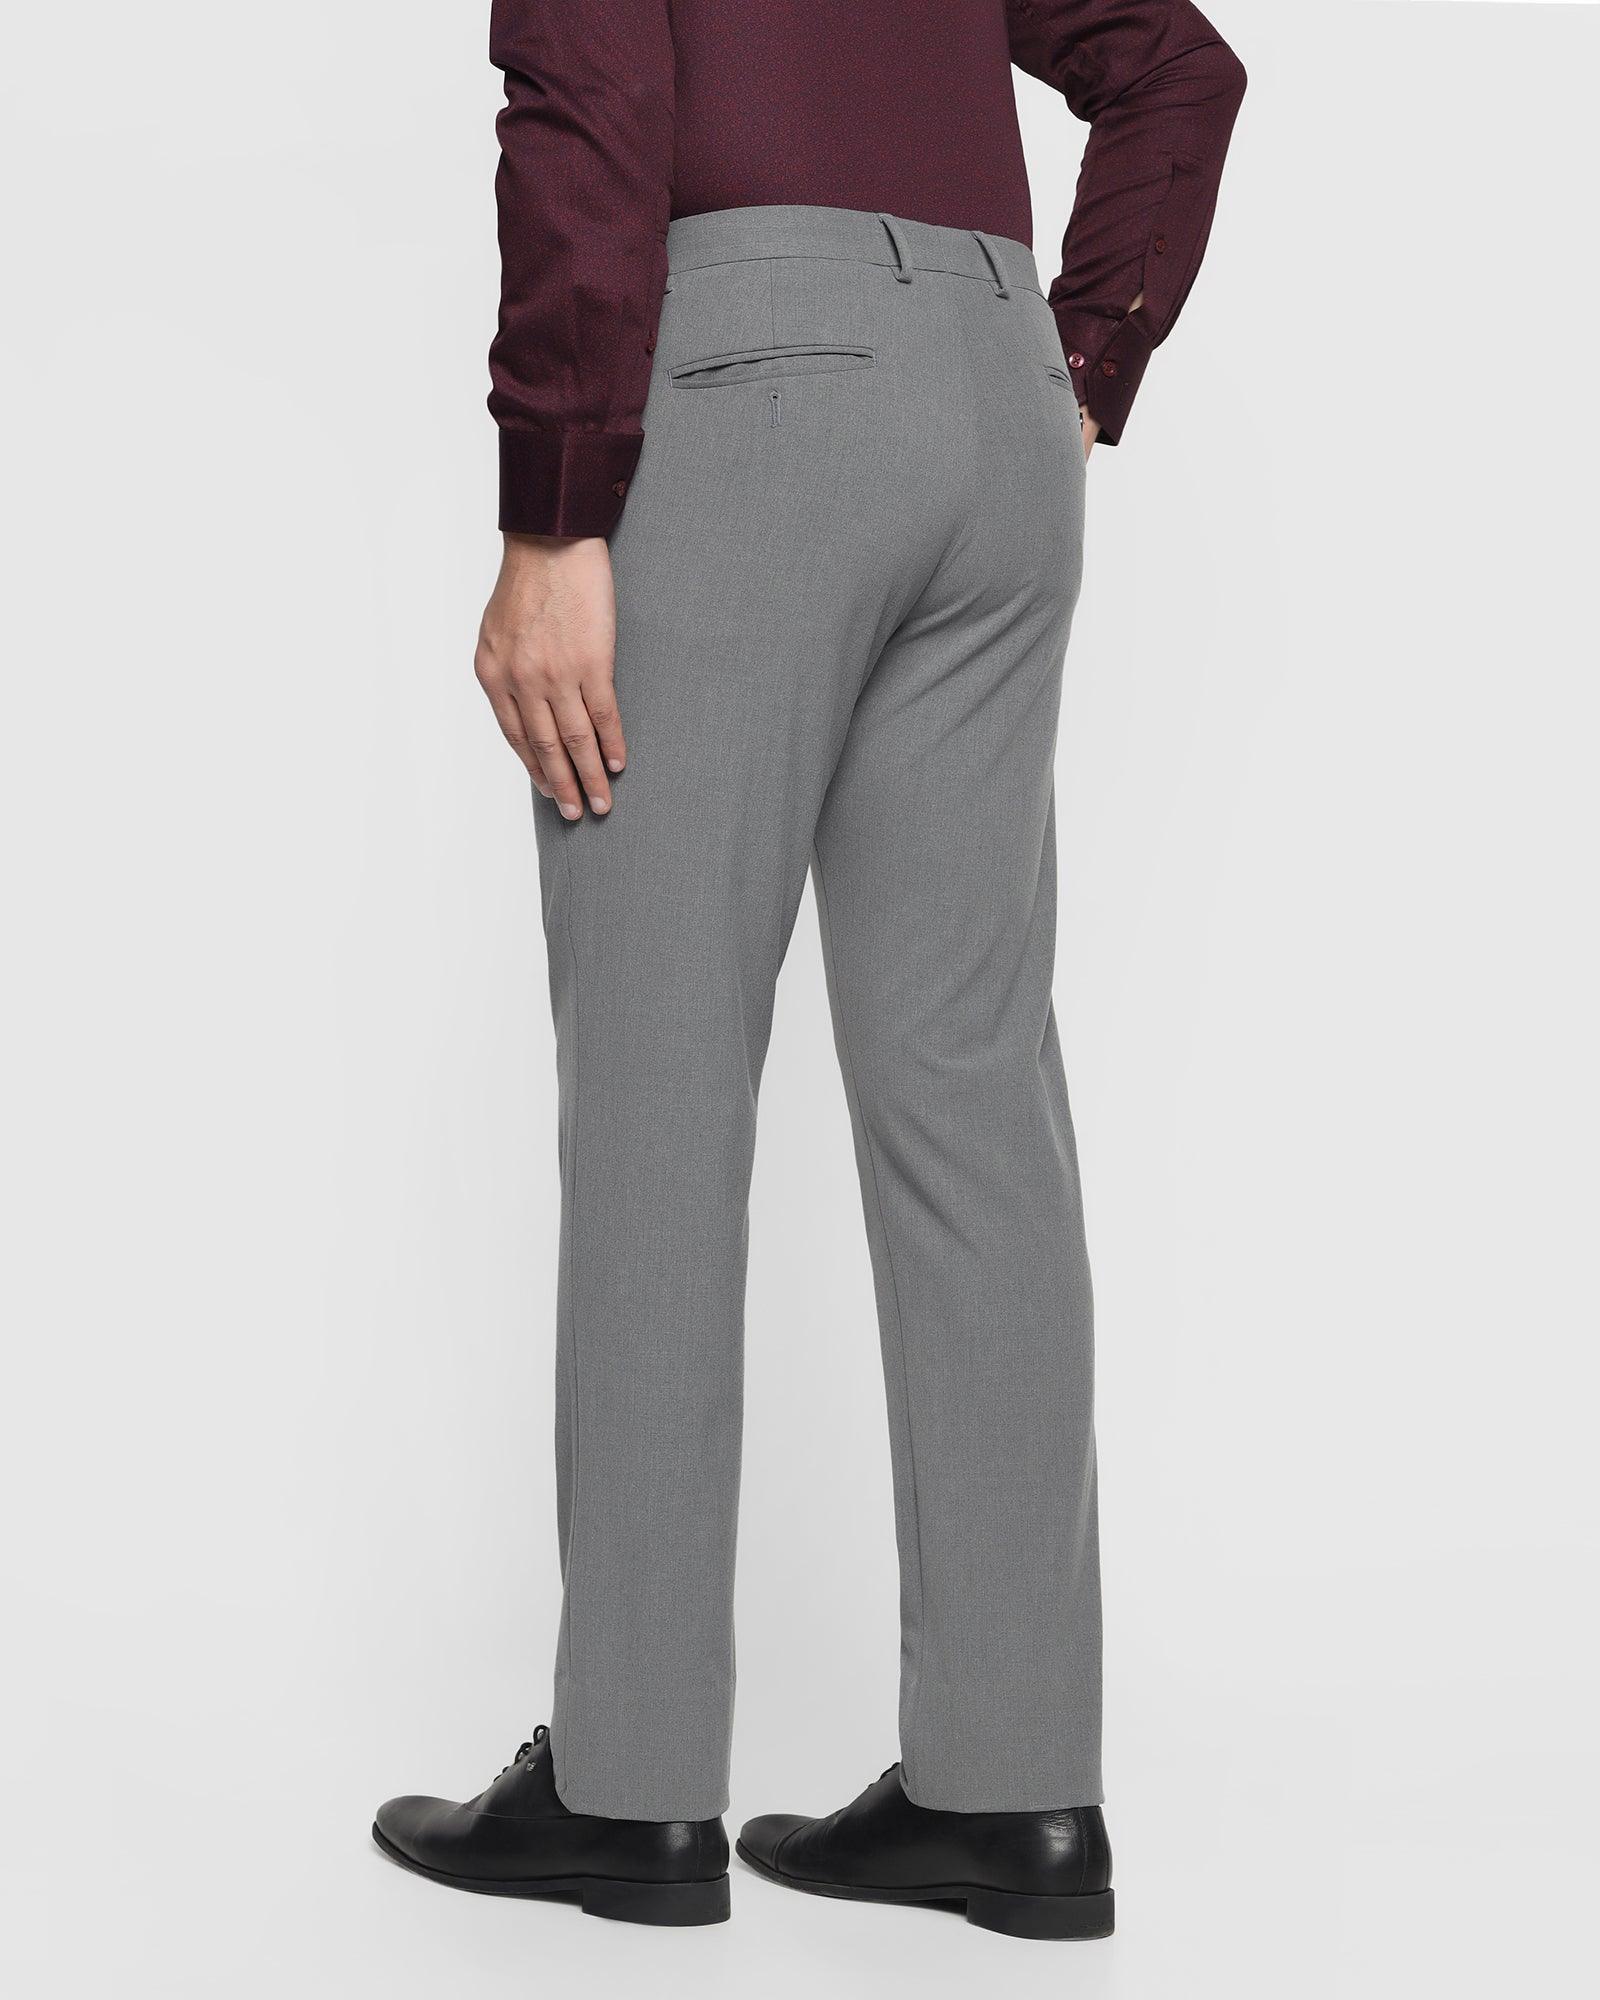 Selected Homme slim fit suit pants in light gray | ASOS